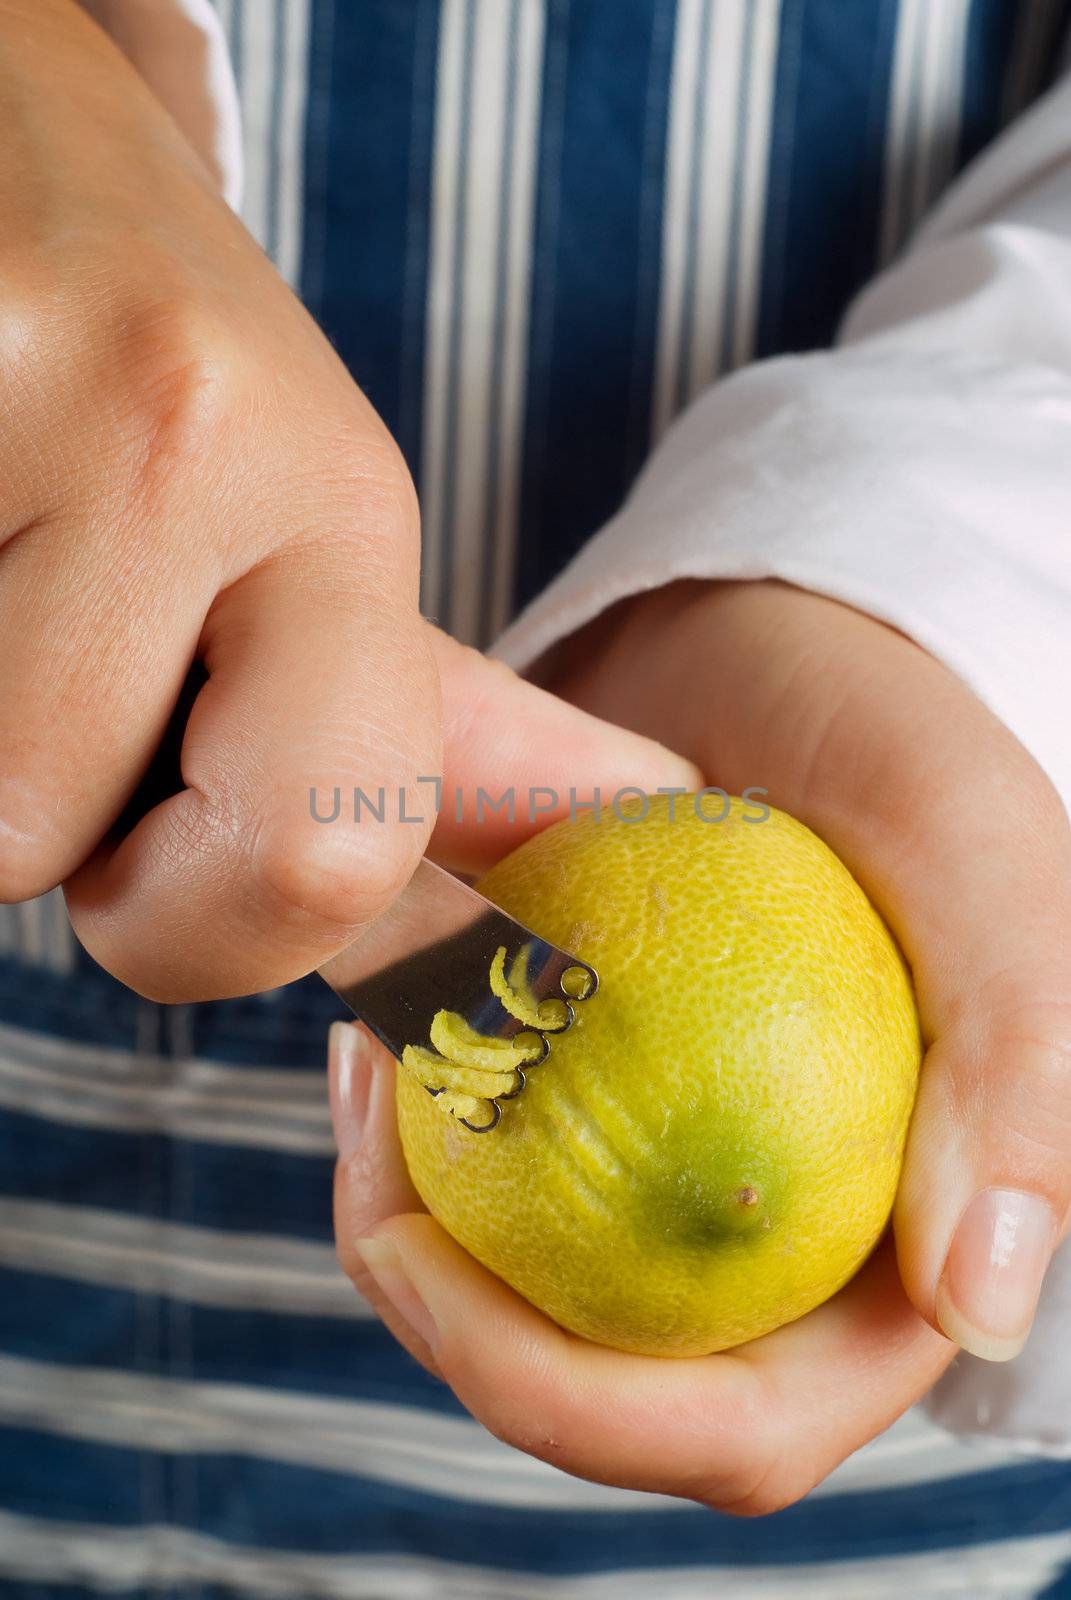 Female woman cook or chef cutting or zesting a lemon